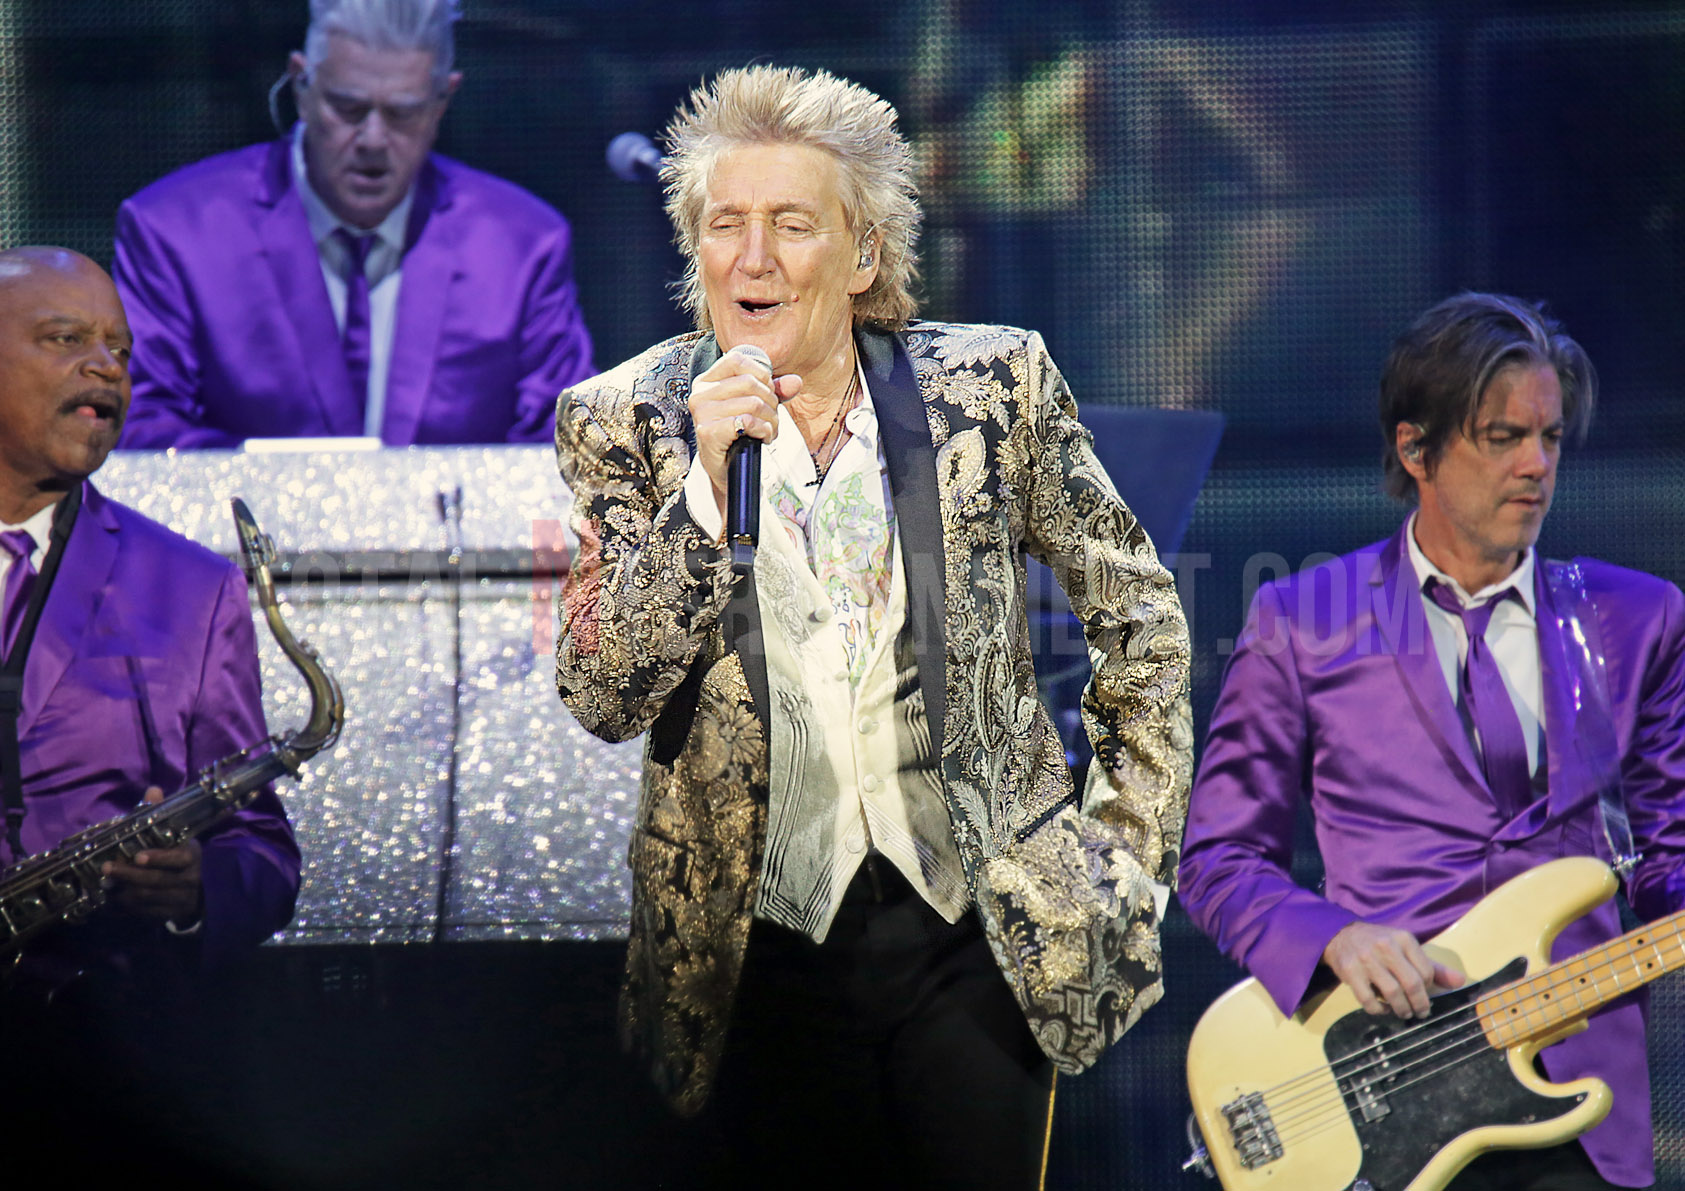 Rod Stewart puts on spectacular show in Manchester - TotalNtertainment